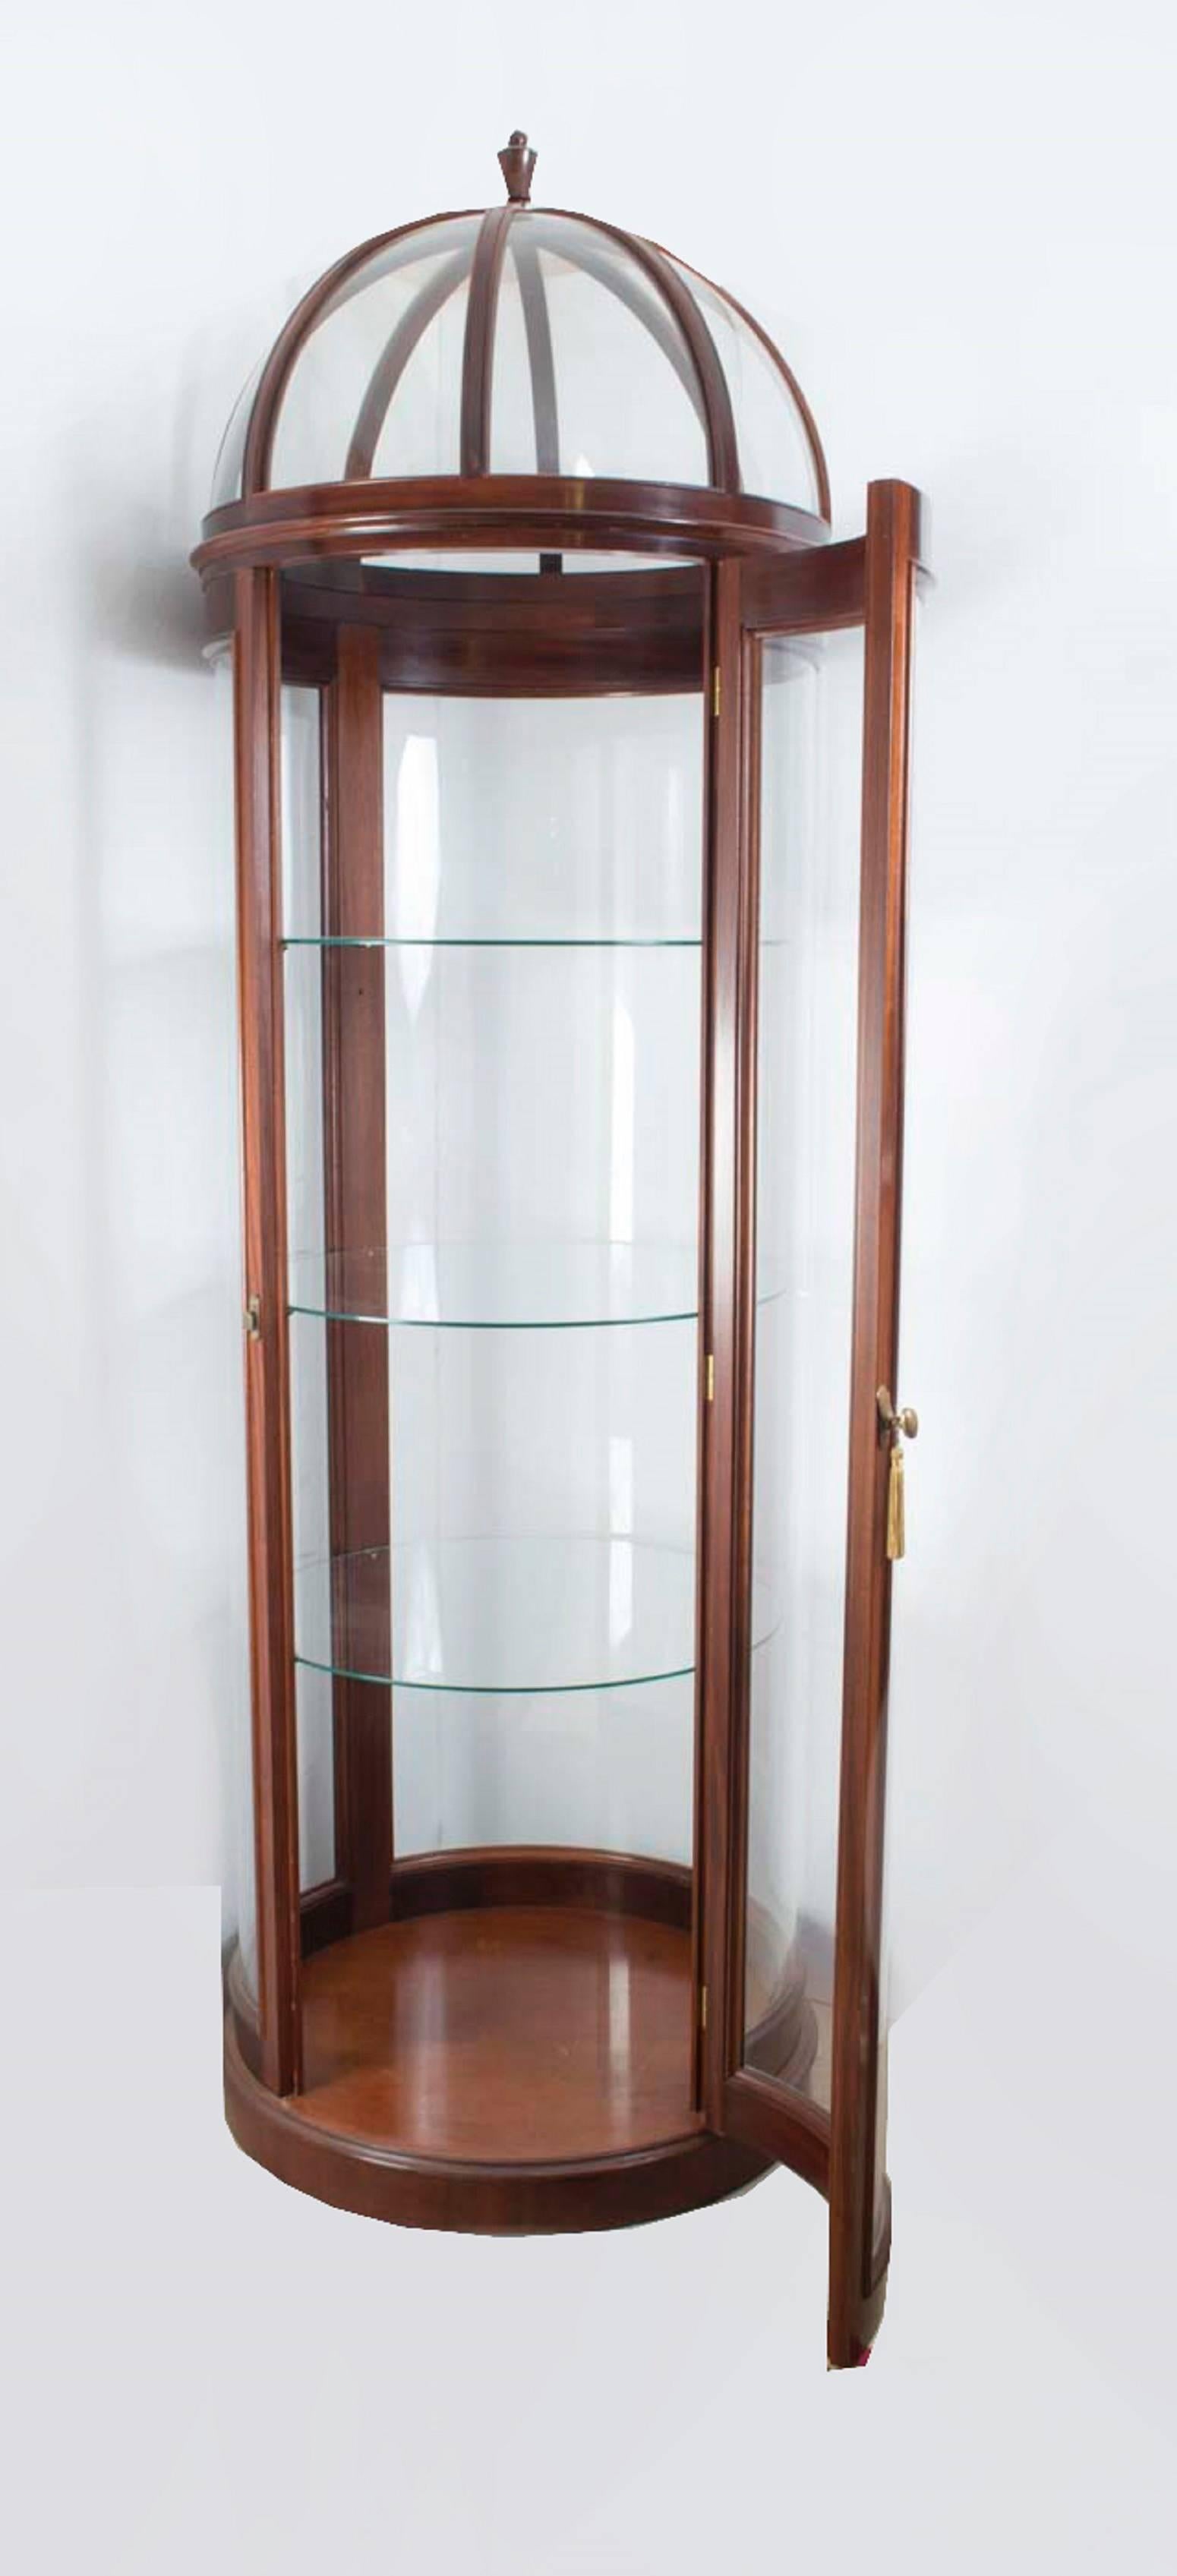 This is an exquisite and uniquely designed domed circular glass display cabinet, dating from the last quarter of the 20th century.

This tall display cabinet has been accomplished in an elegant mahogany and glass. Each side of the cabinet consists